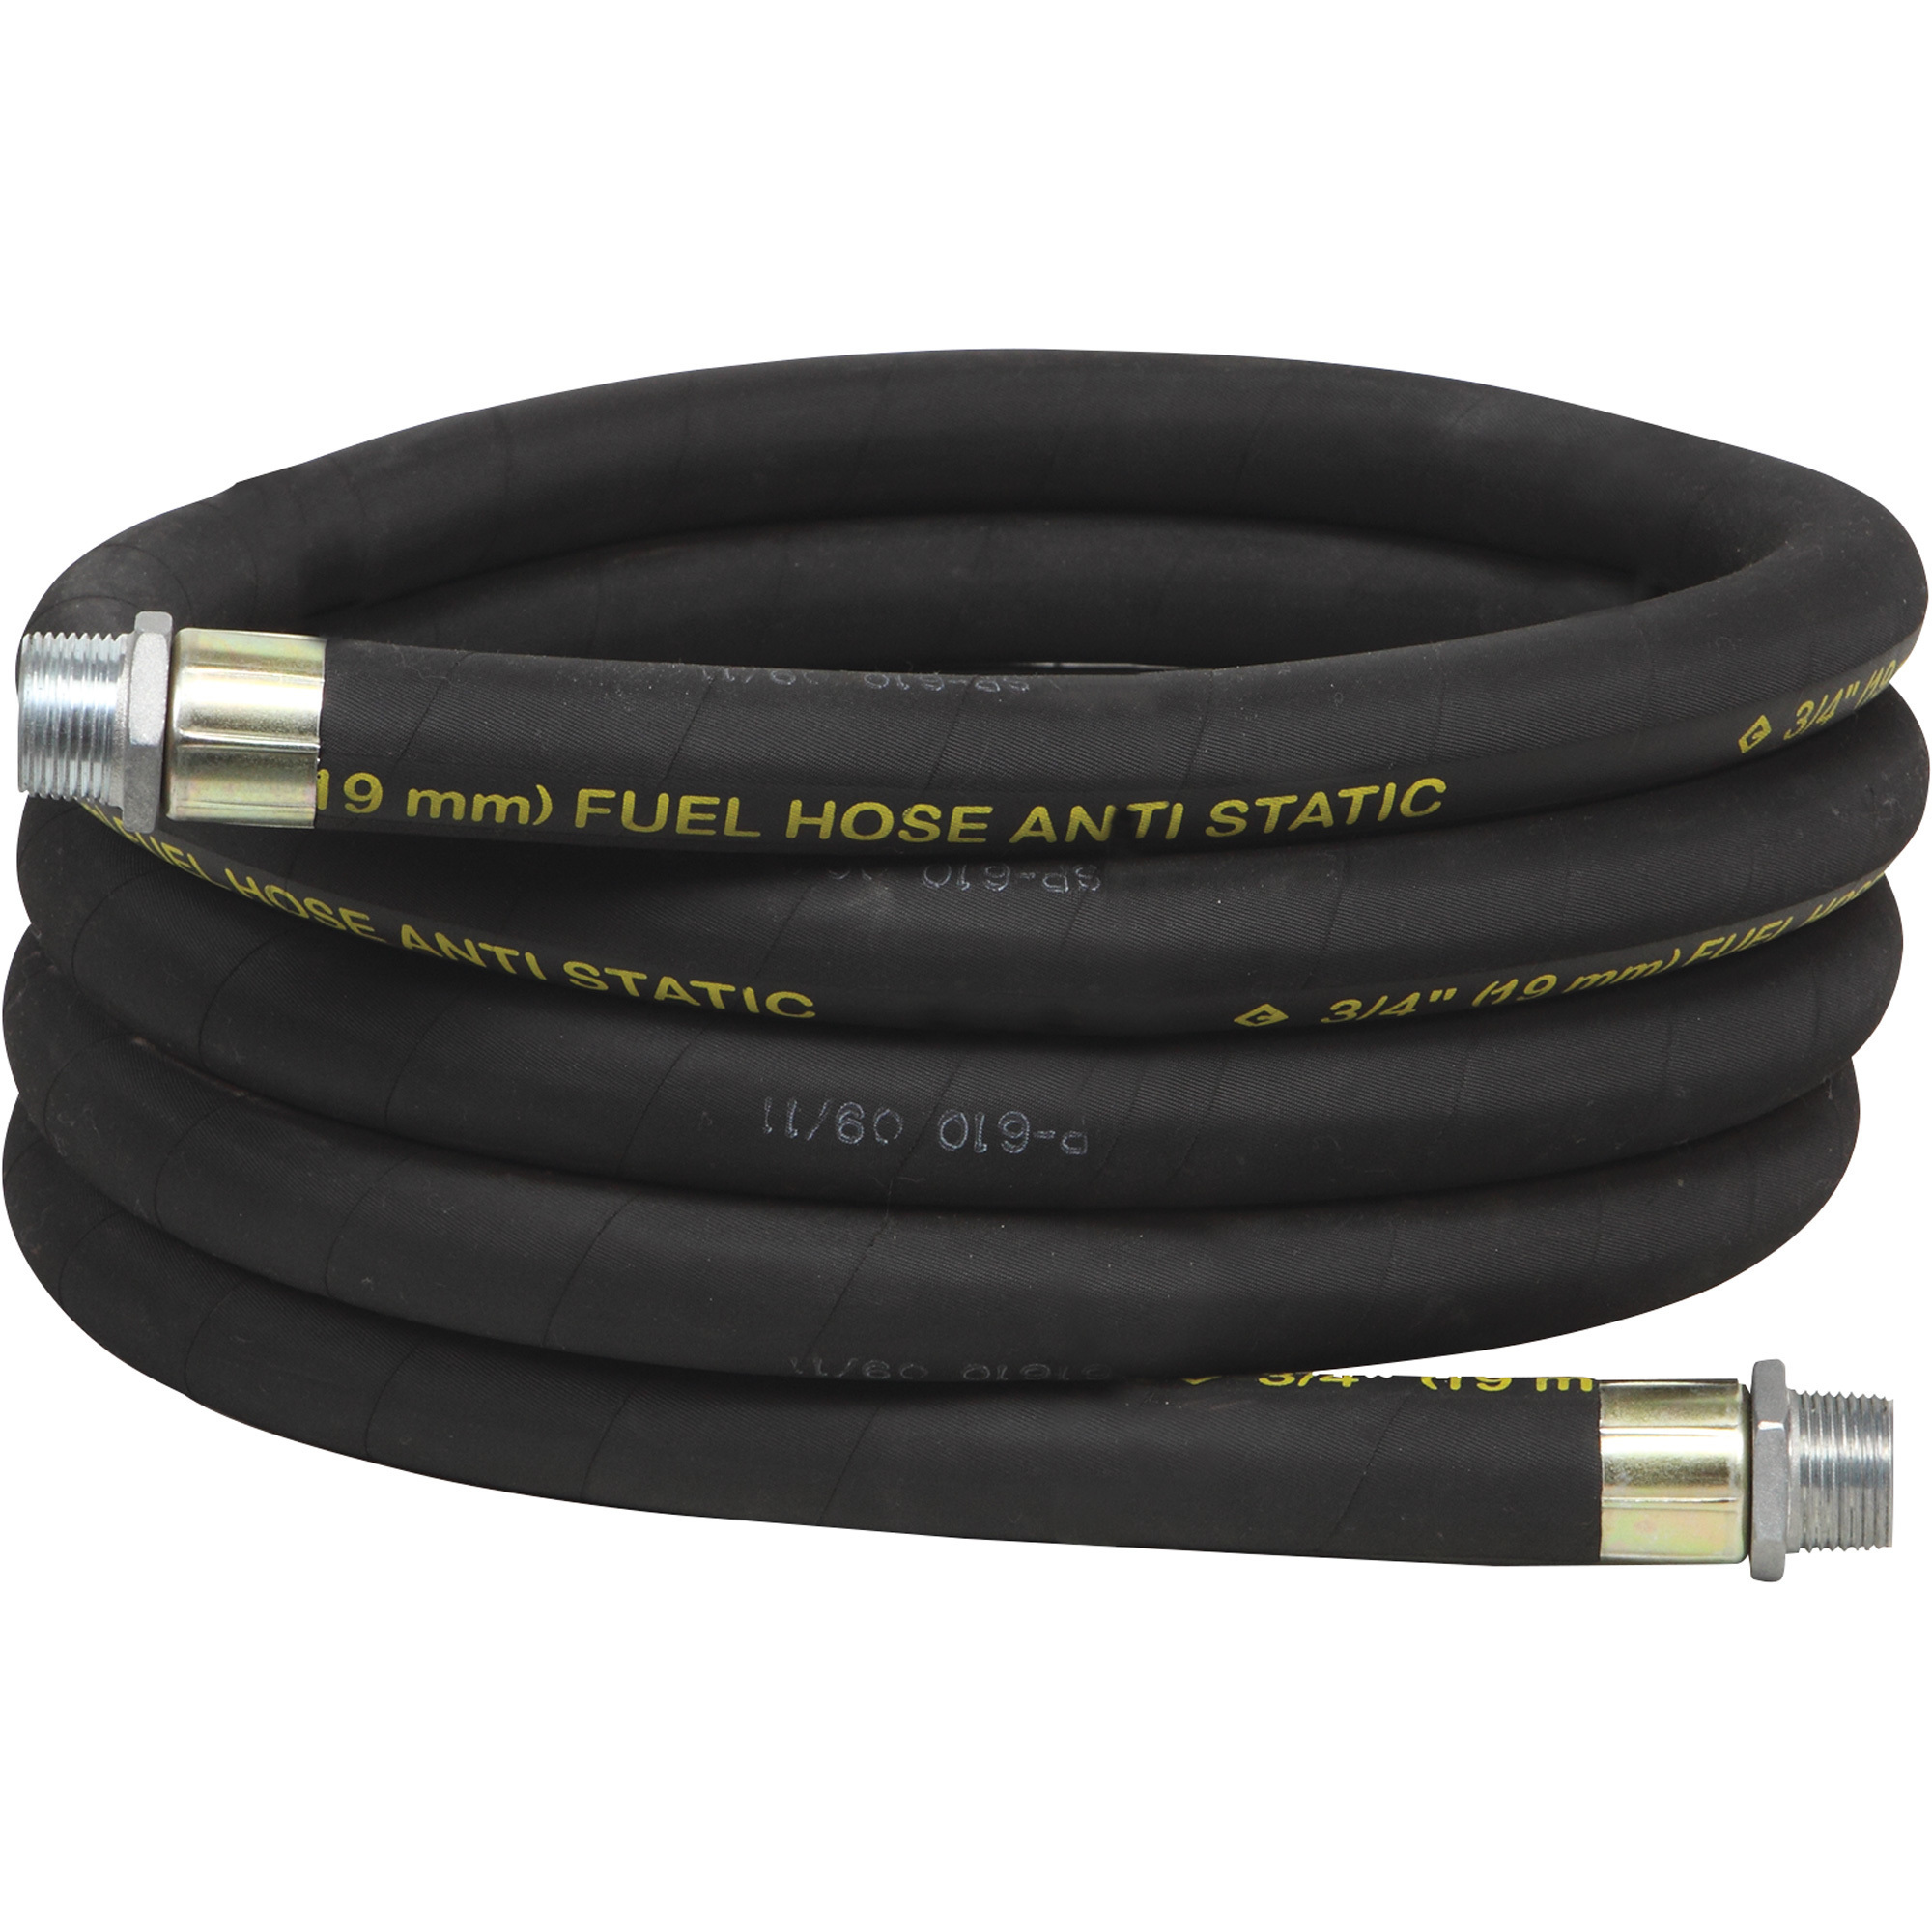 Roughneck Antistatic Grounded Fuel Hose, 1Inch x 14ft.